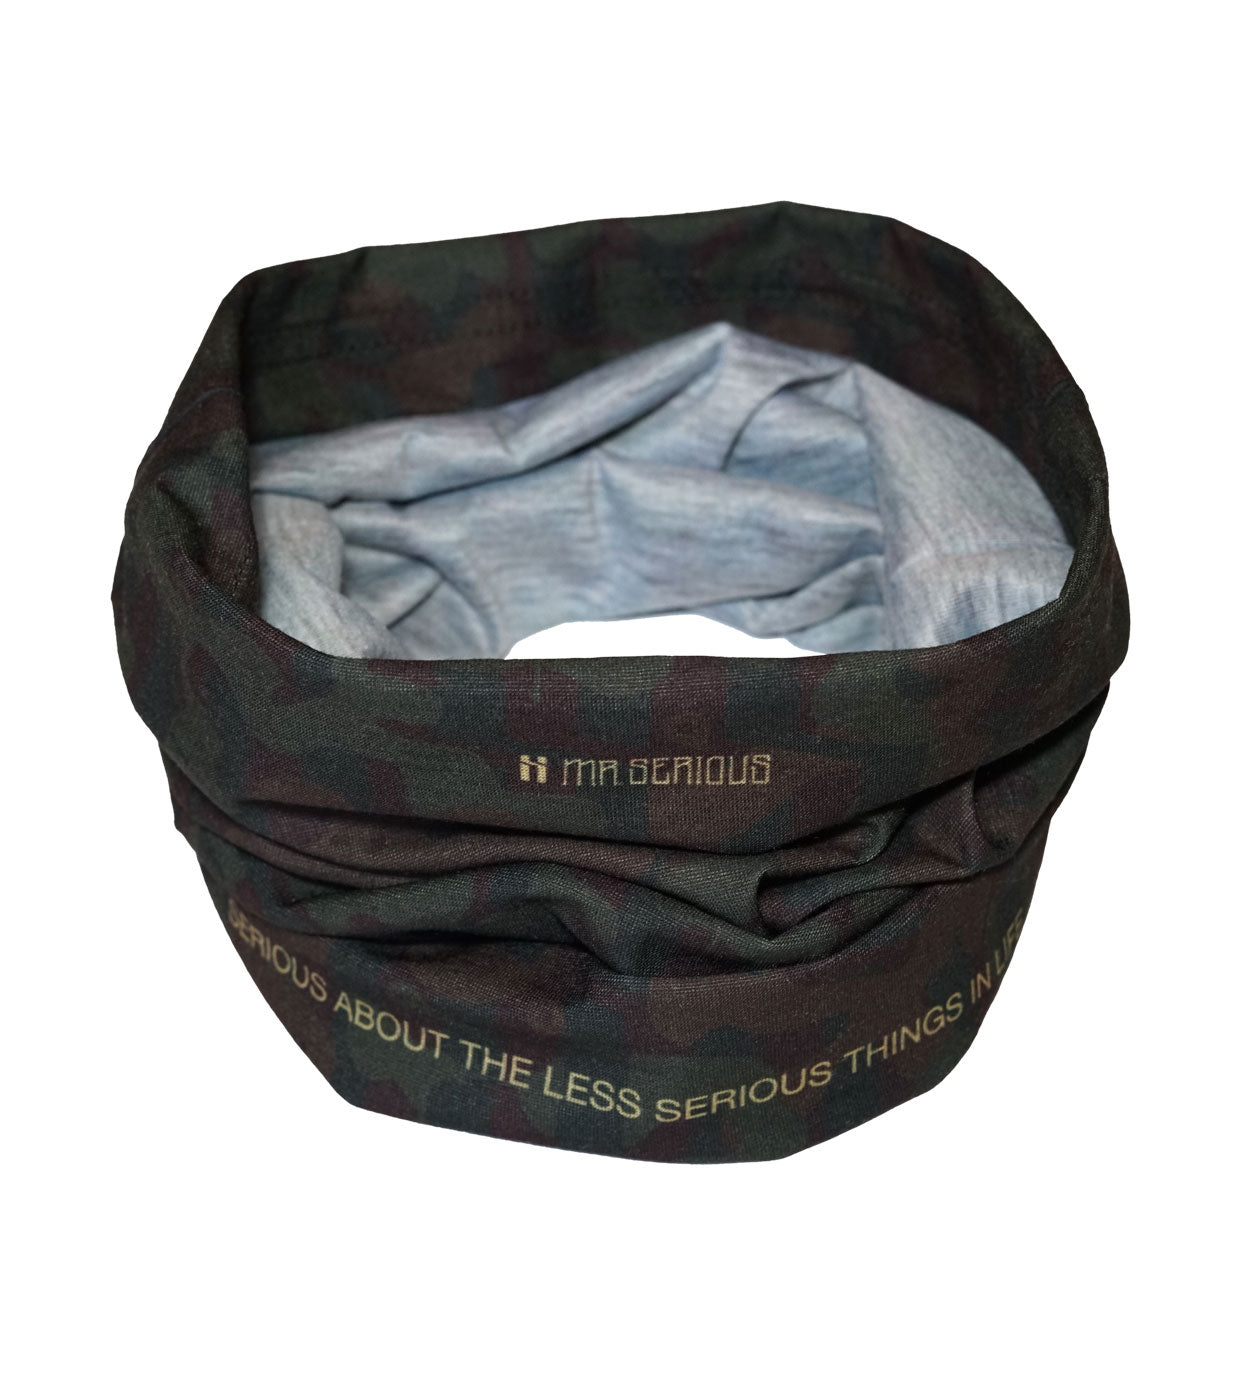 Mr. Serious Camo Tunnel Scarf